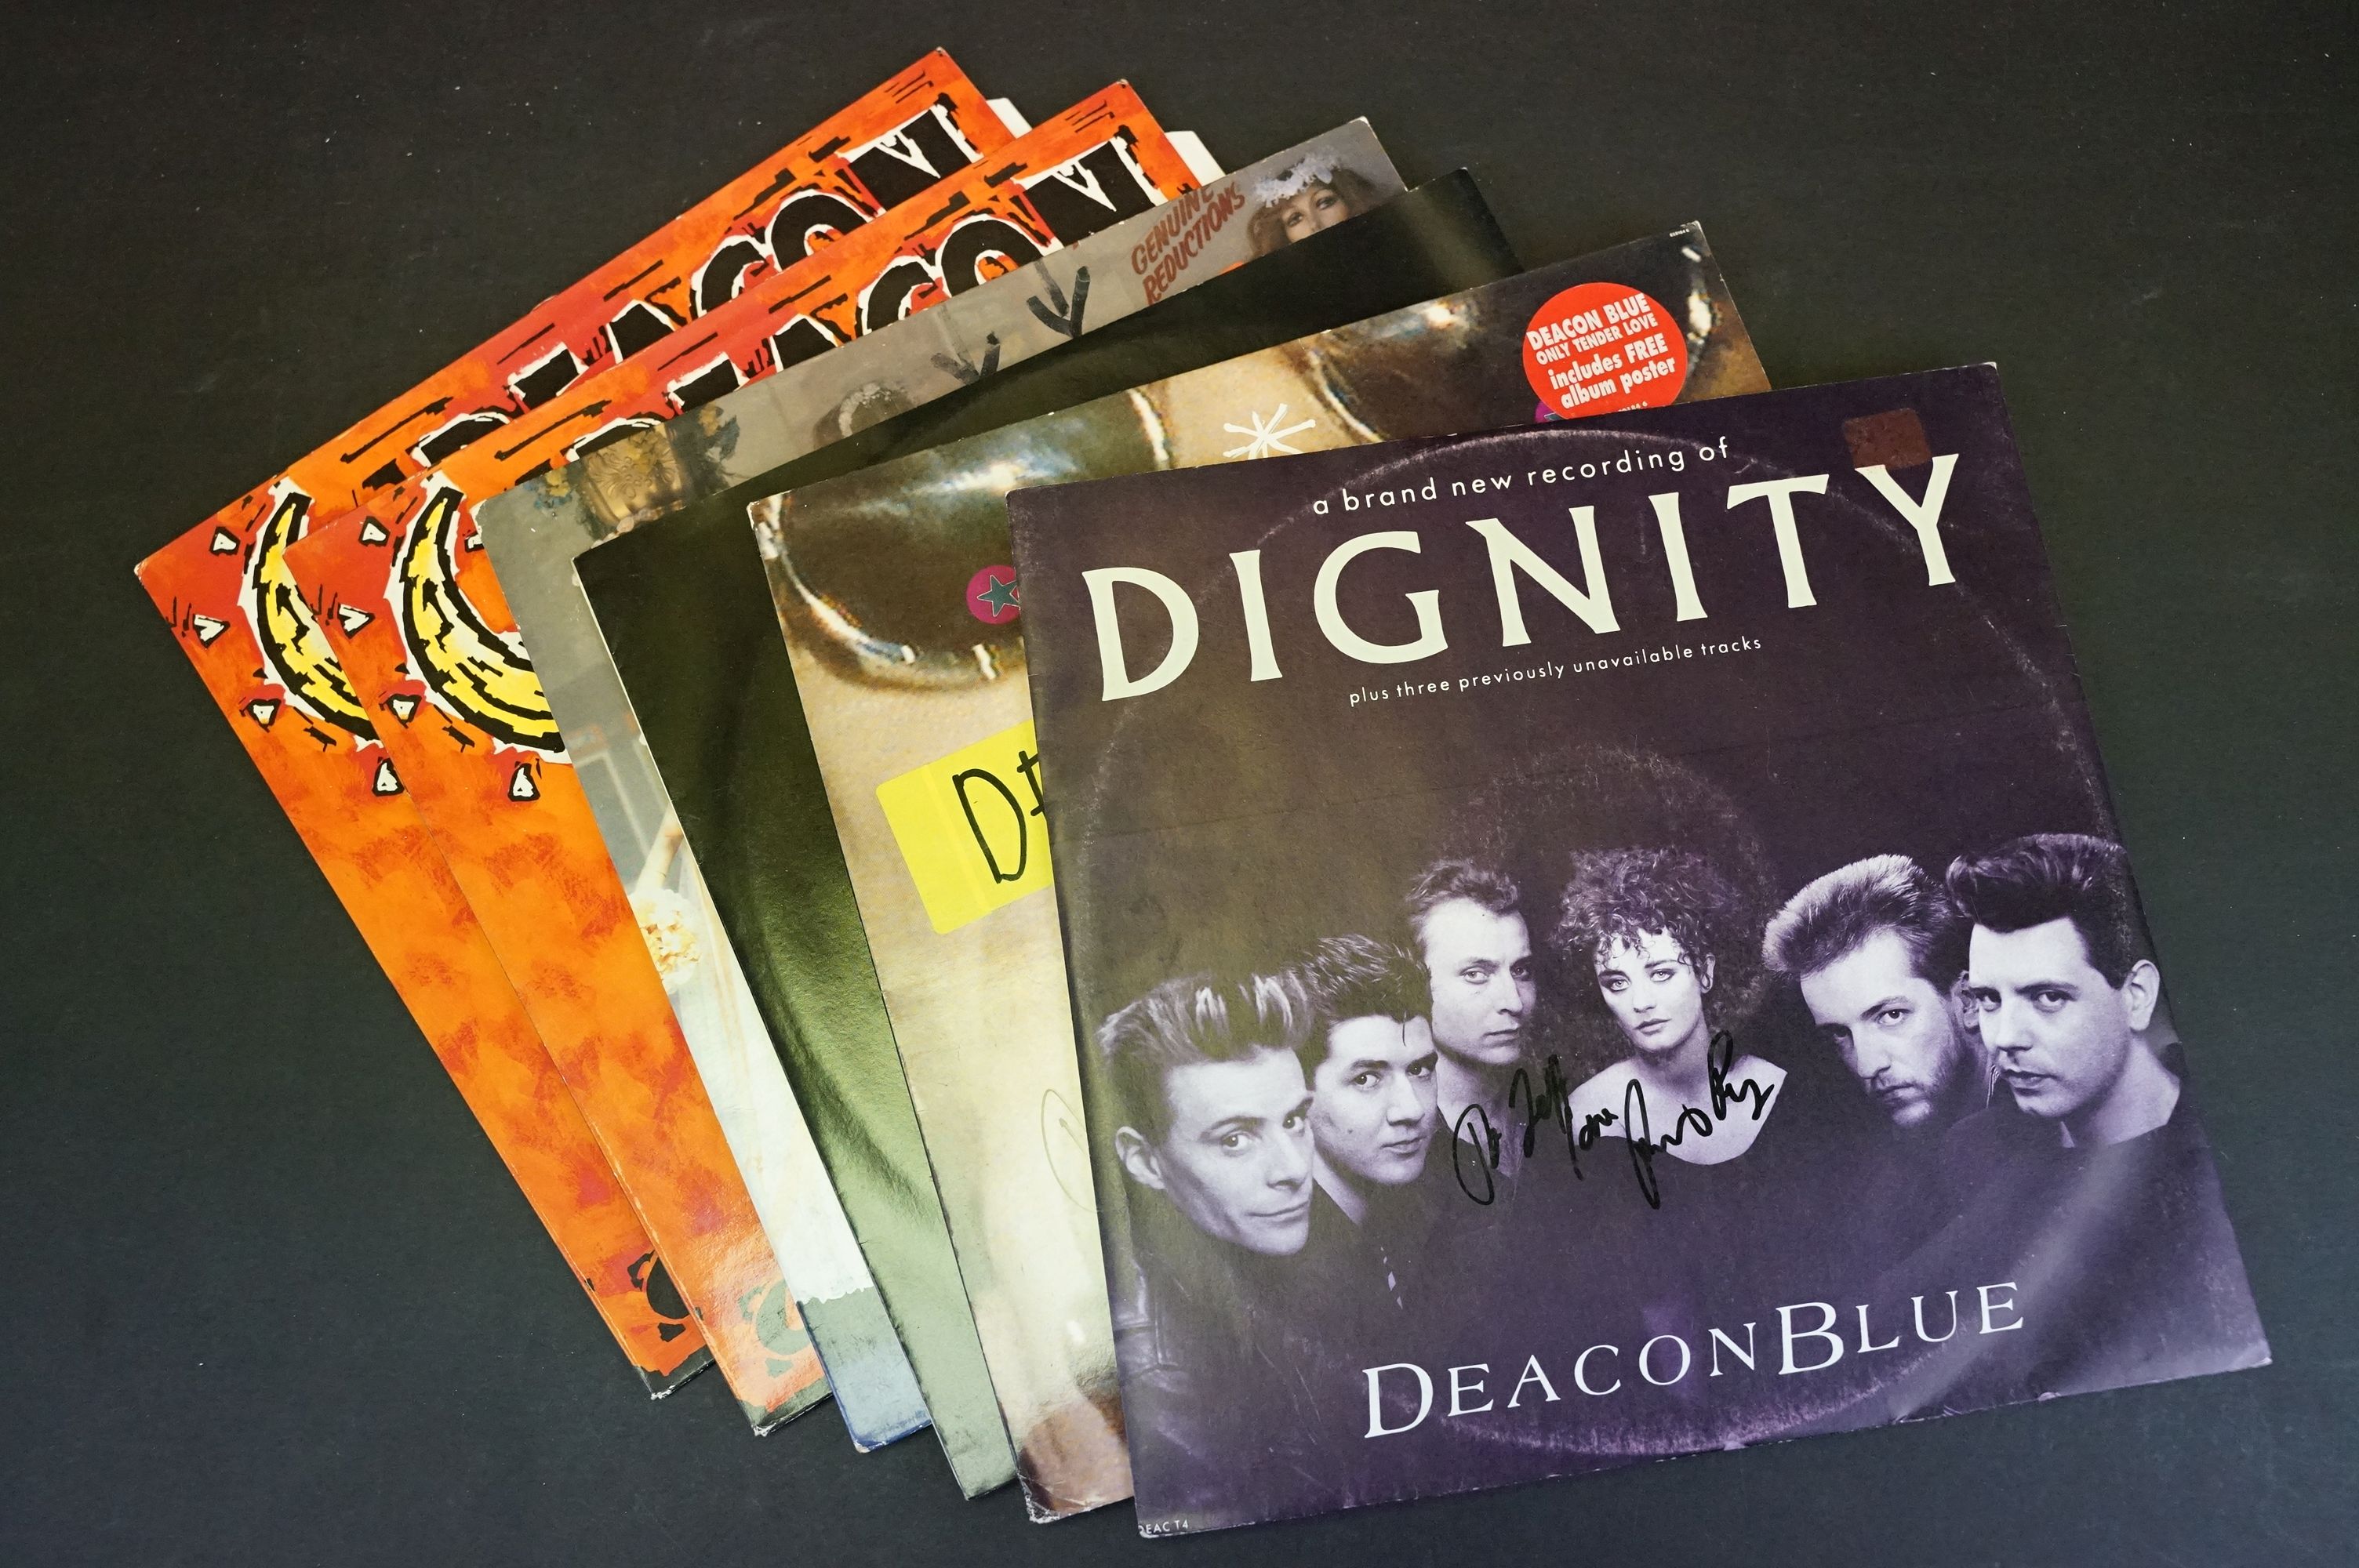 Vinyl / Autographs - 4 albums, 16 x 12” singles and 4 x 10” by Deacon Blue, all signed by Ricky Ross - Image 5 of 5